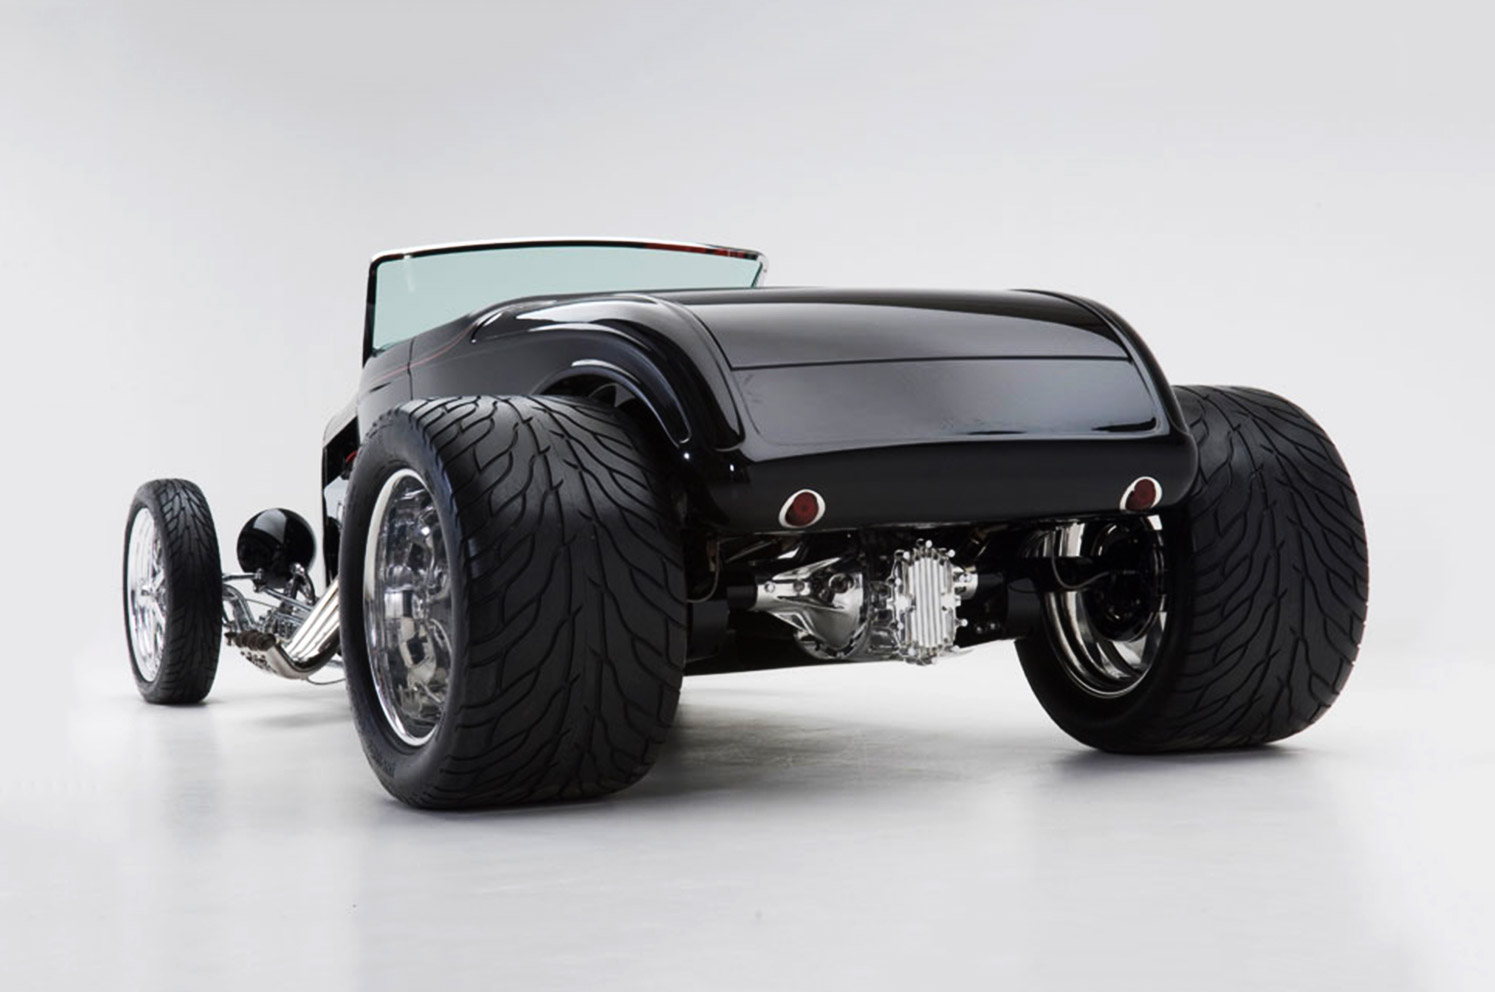 Ford Roadster Backgrounds, Compatible - PC, Mobile, Gadgets| 1495x992 px